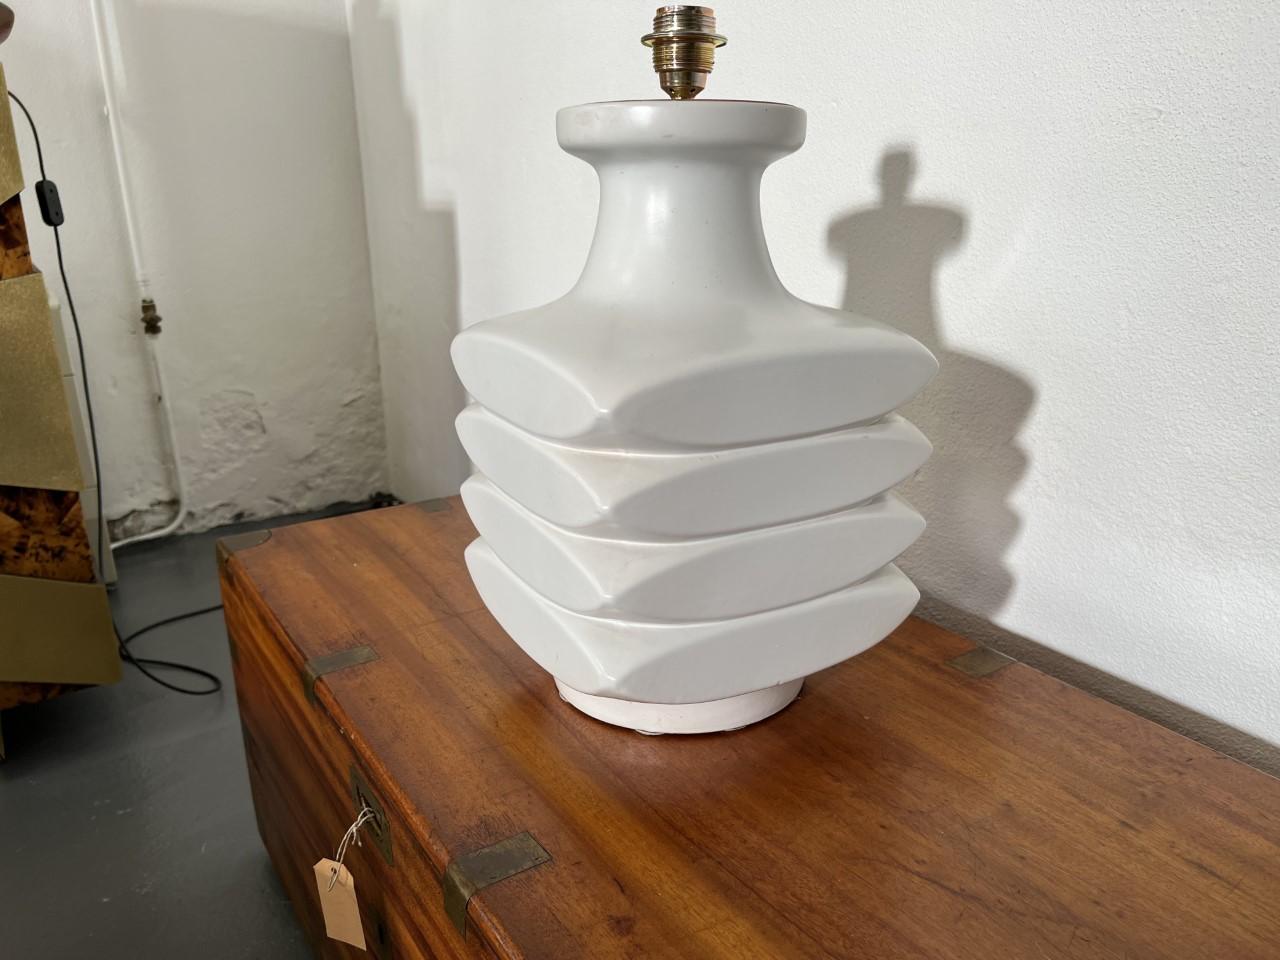 Large 1970s Ceramic Brutalist Table Lamp by Cari Zalloni For Sale 3